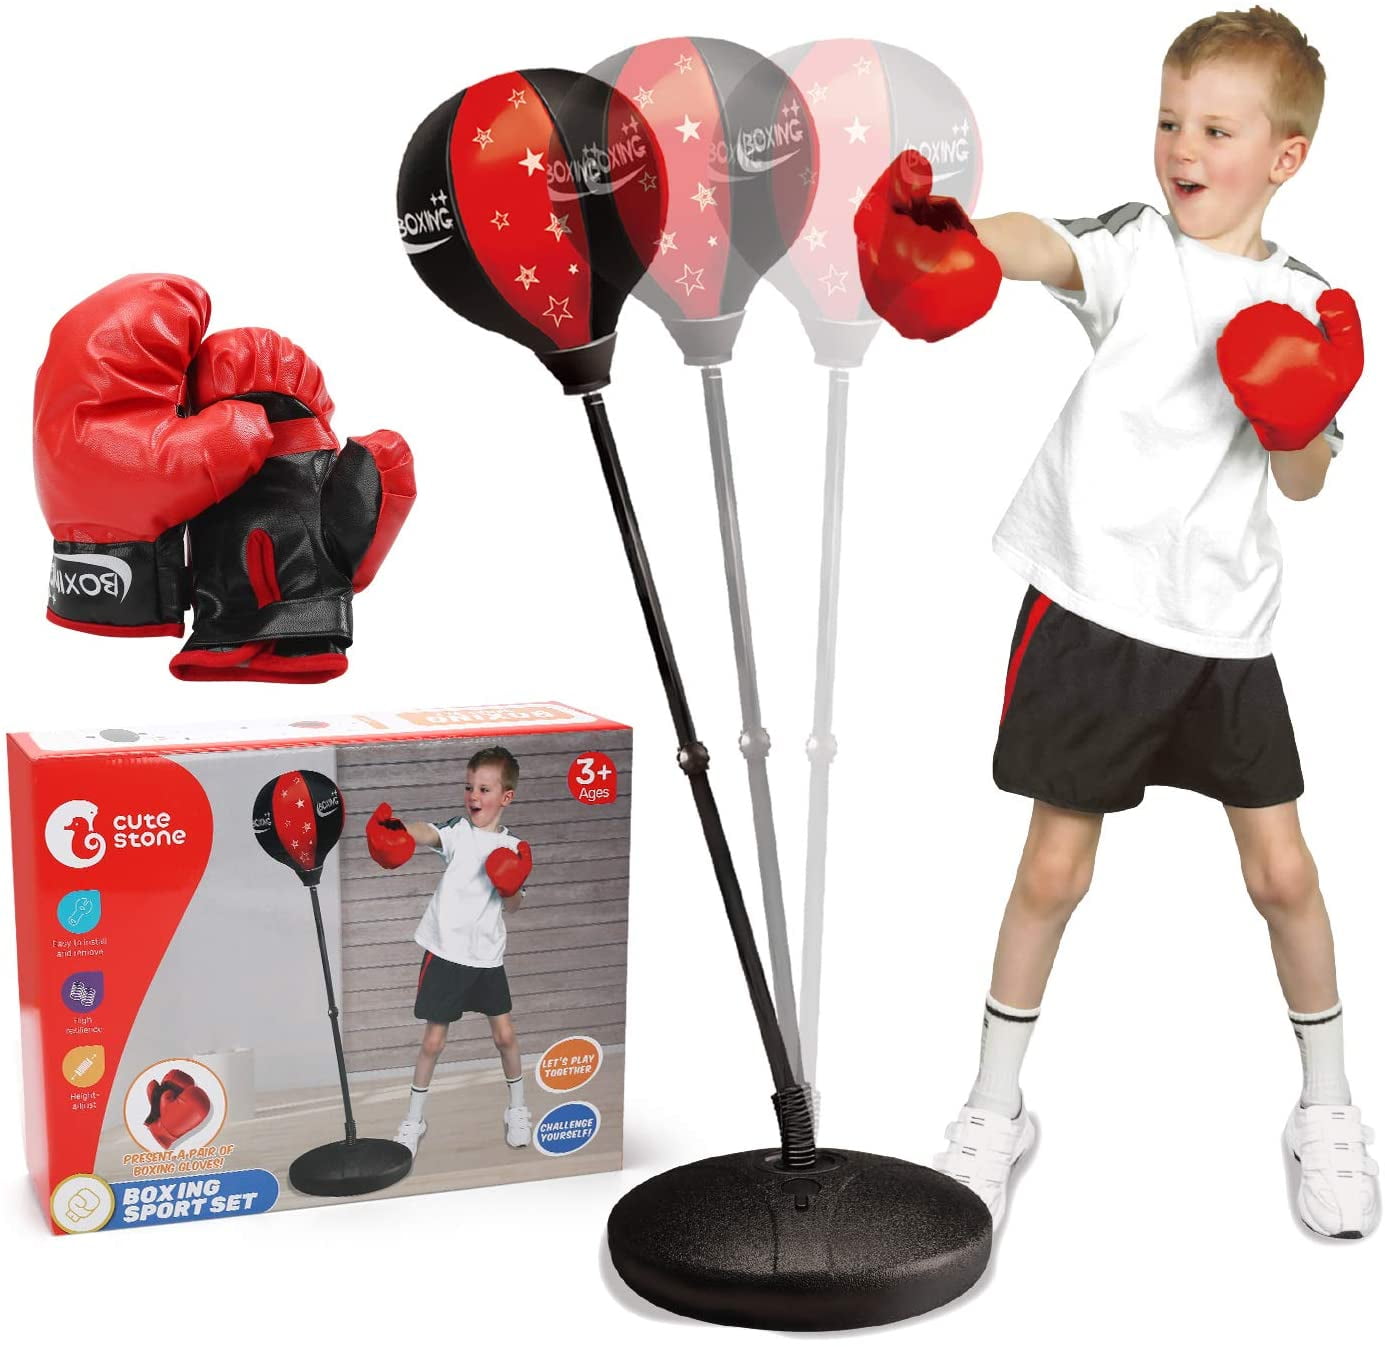 Kids Teens Punching Bag Toy Adjustable Stand Boxing Glove Speed Ball Boys Gift 